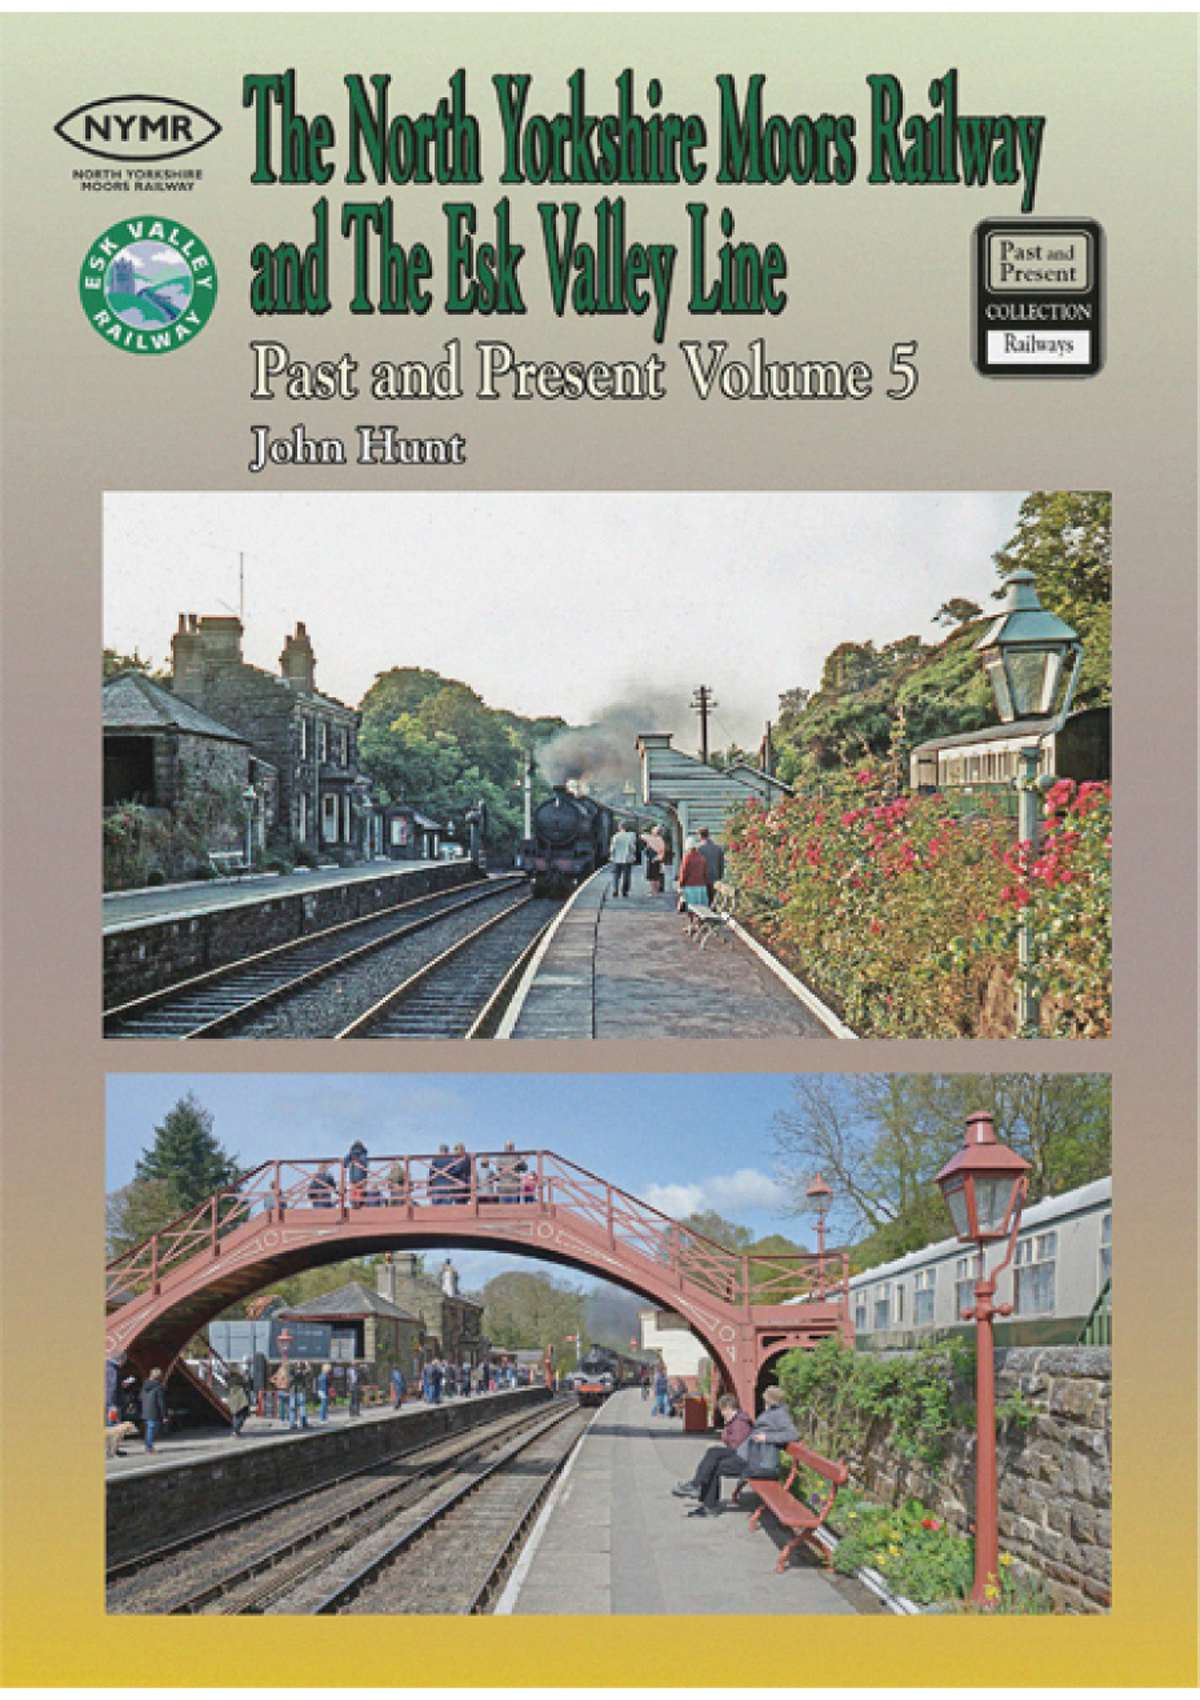 3021- North Yorkshire Moors Railway and The Esk Valley Line - Past and Present Volume 5 (standard edition)